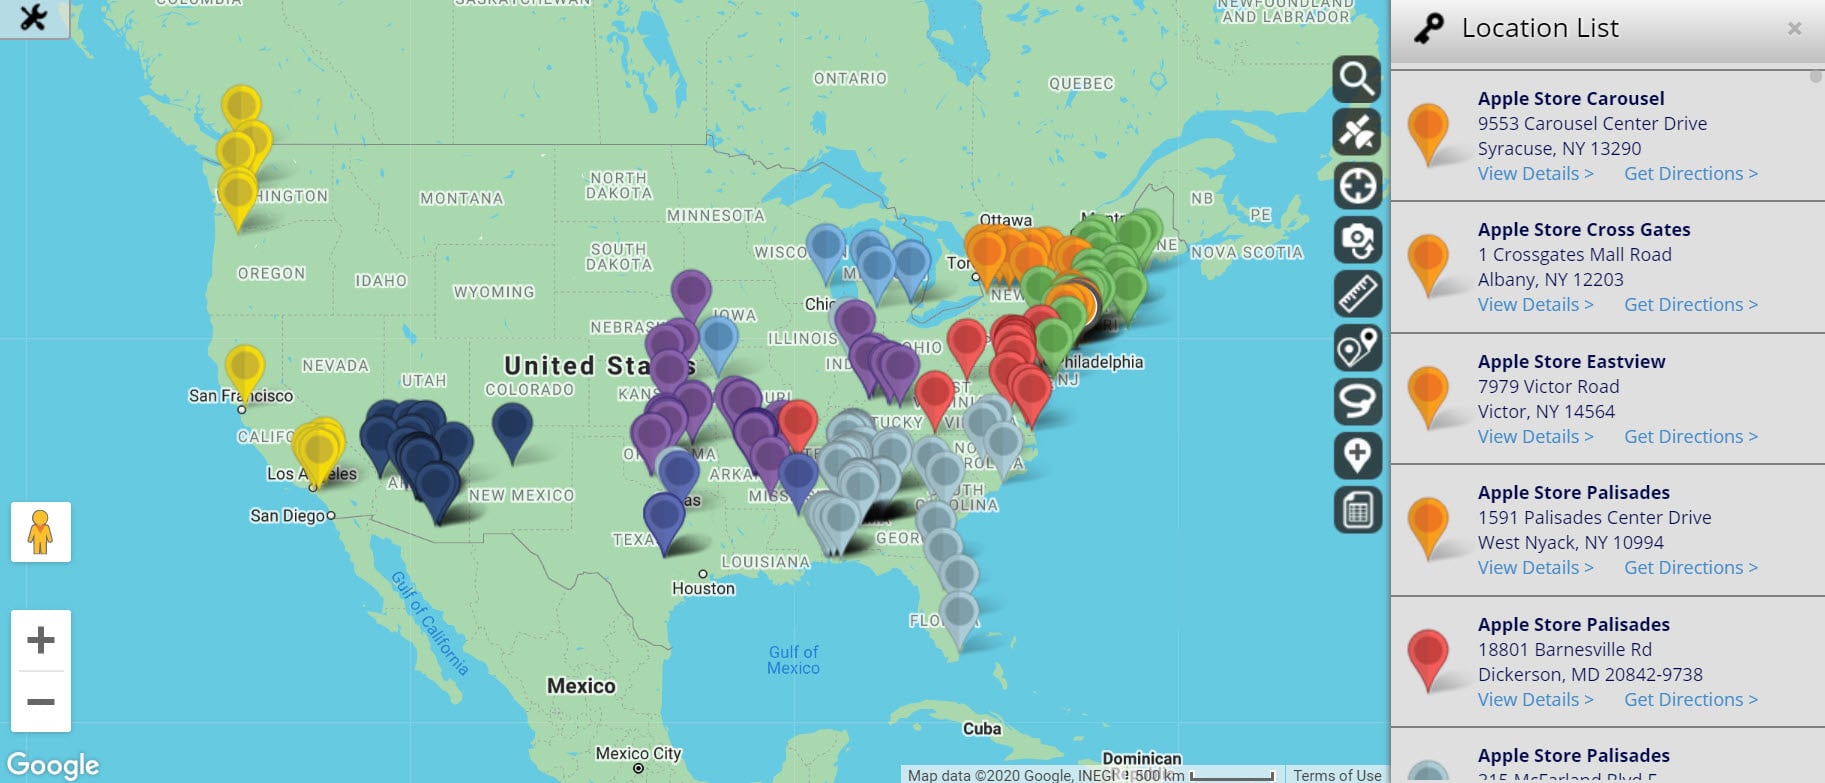 We created an interactive Open Source Map and looking for